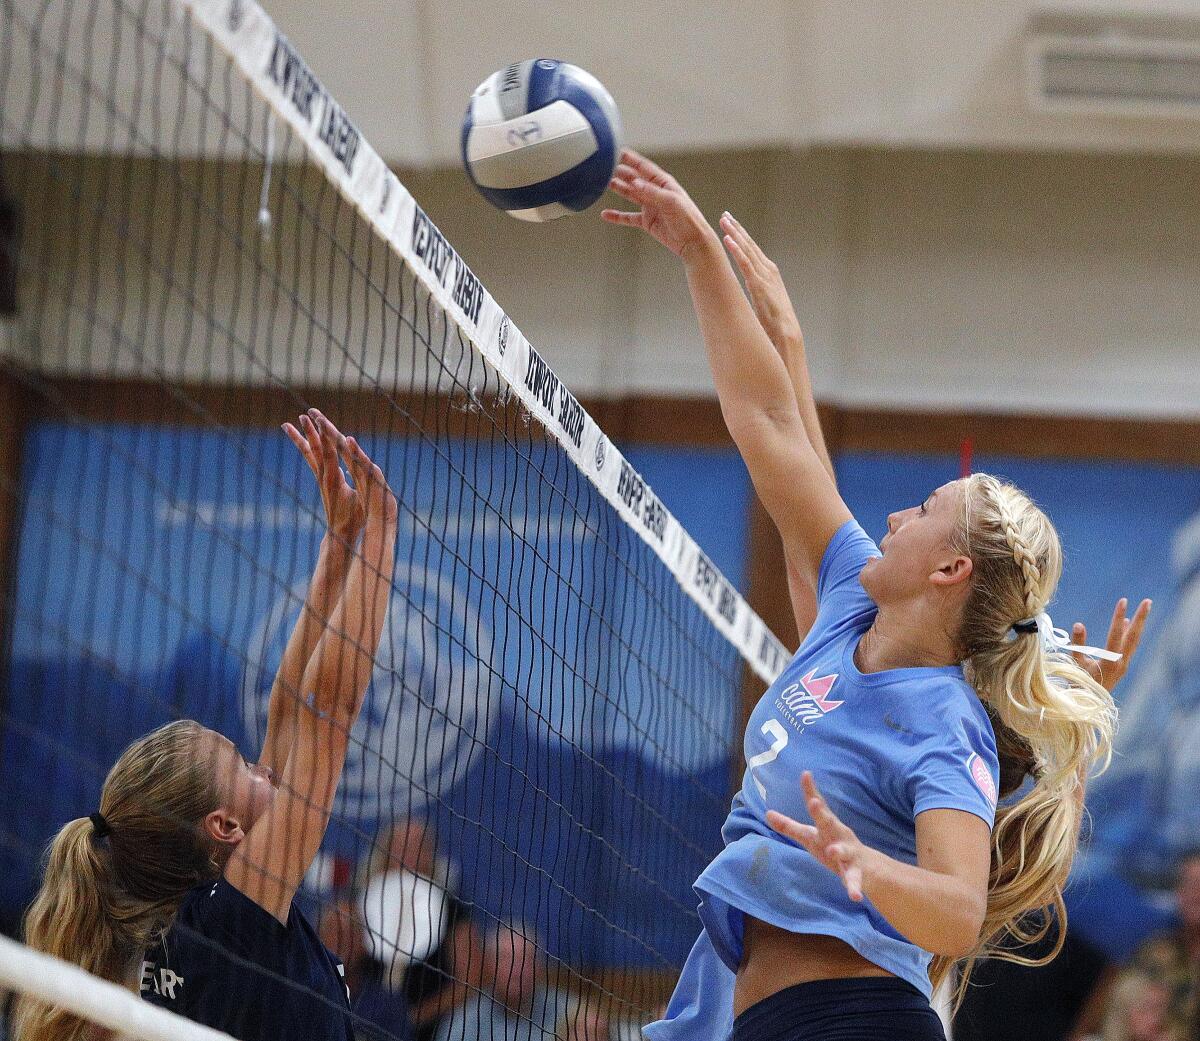 Nikki Senske hits the ball back for a point in a Sunset Conference crossover match at Newport Harbor on Thursday.